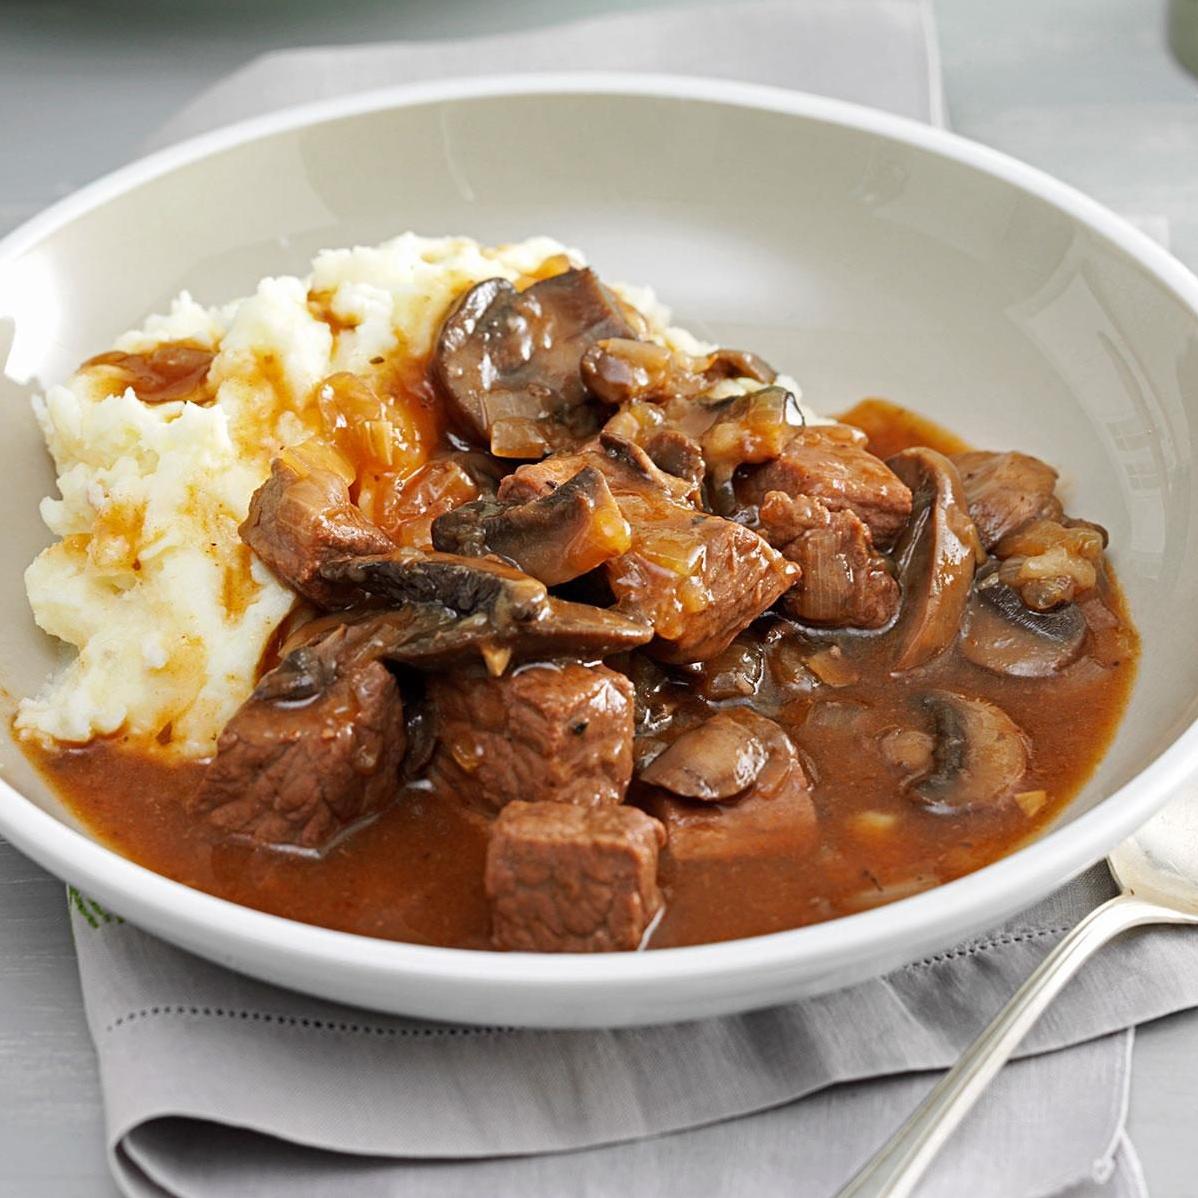  Impress your dinner guests with this elegant casserole featuring the classic combination of steak and mushrooms.